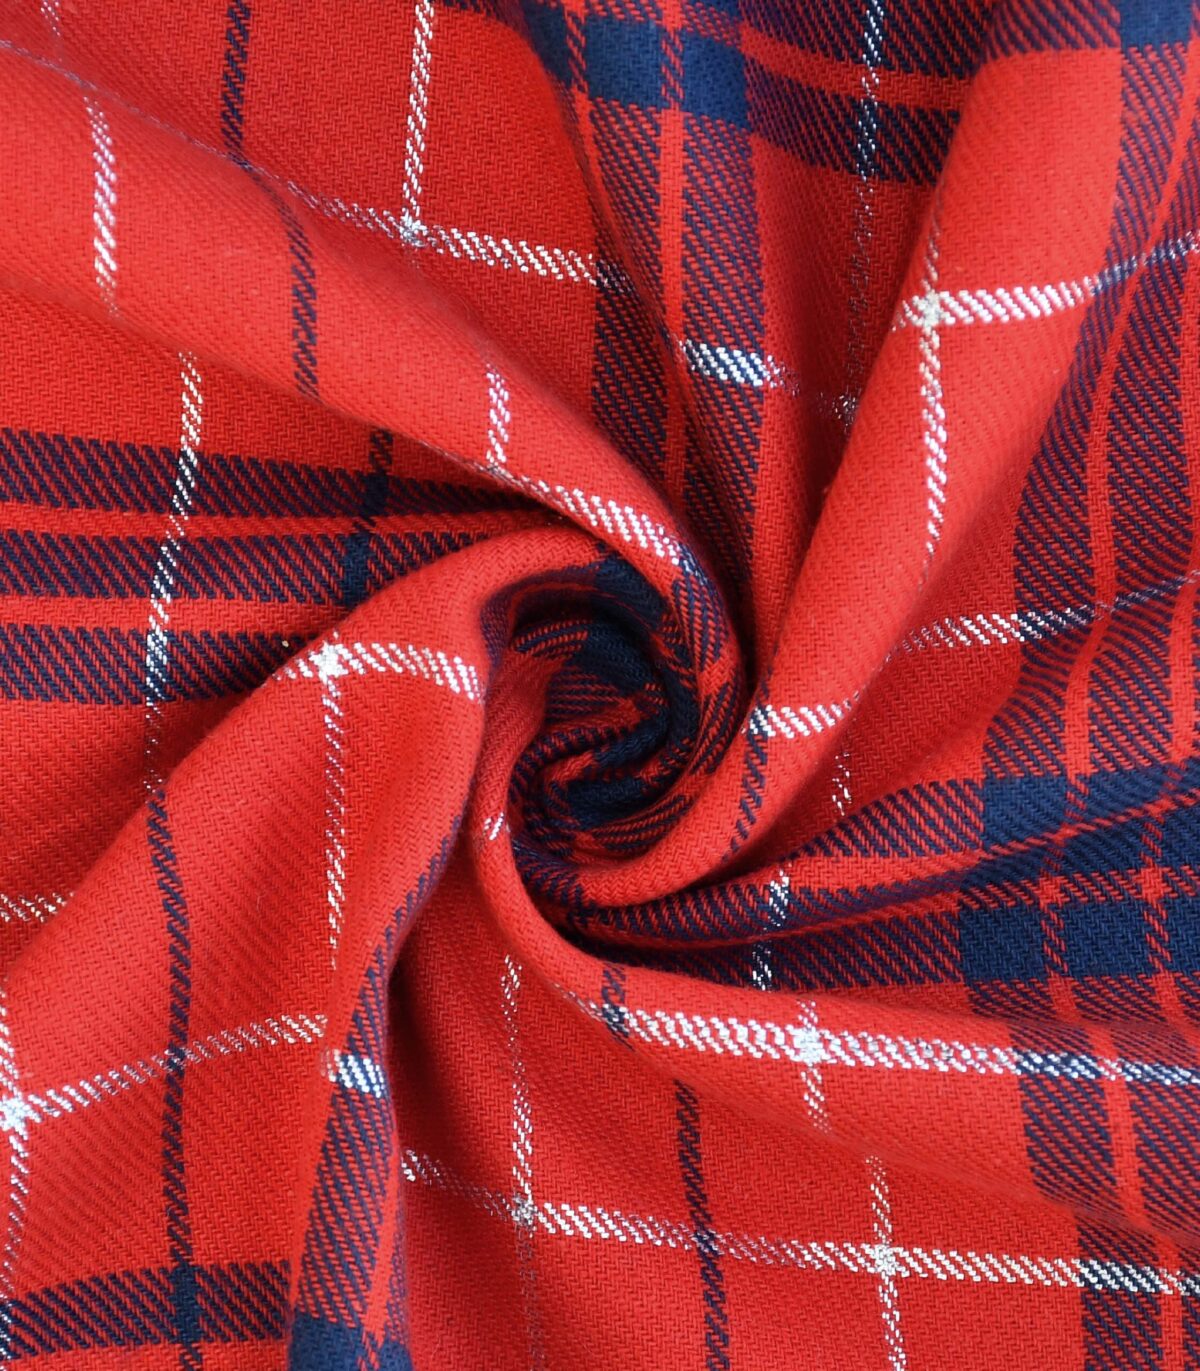 Cotton Lurex Blue Red Checked Fabric